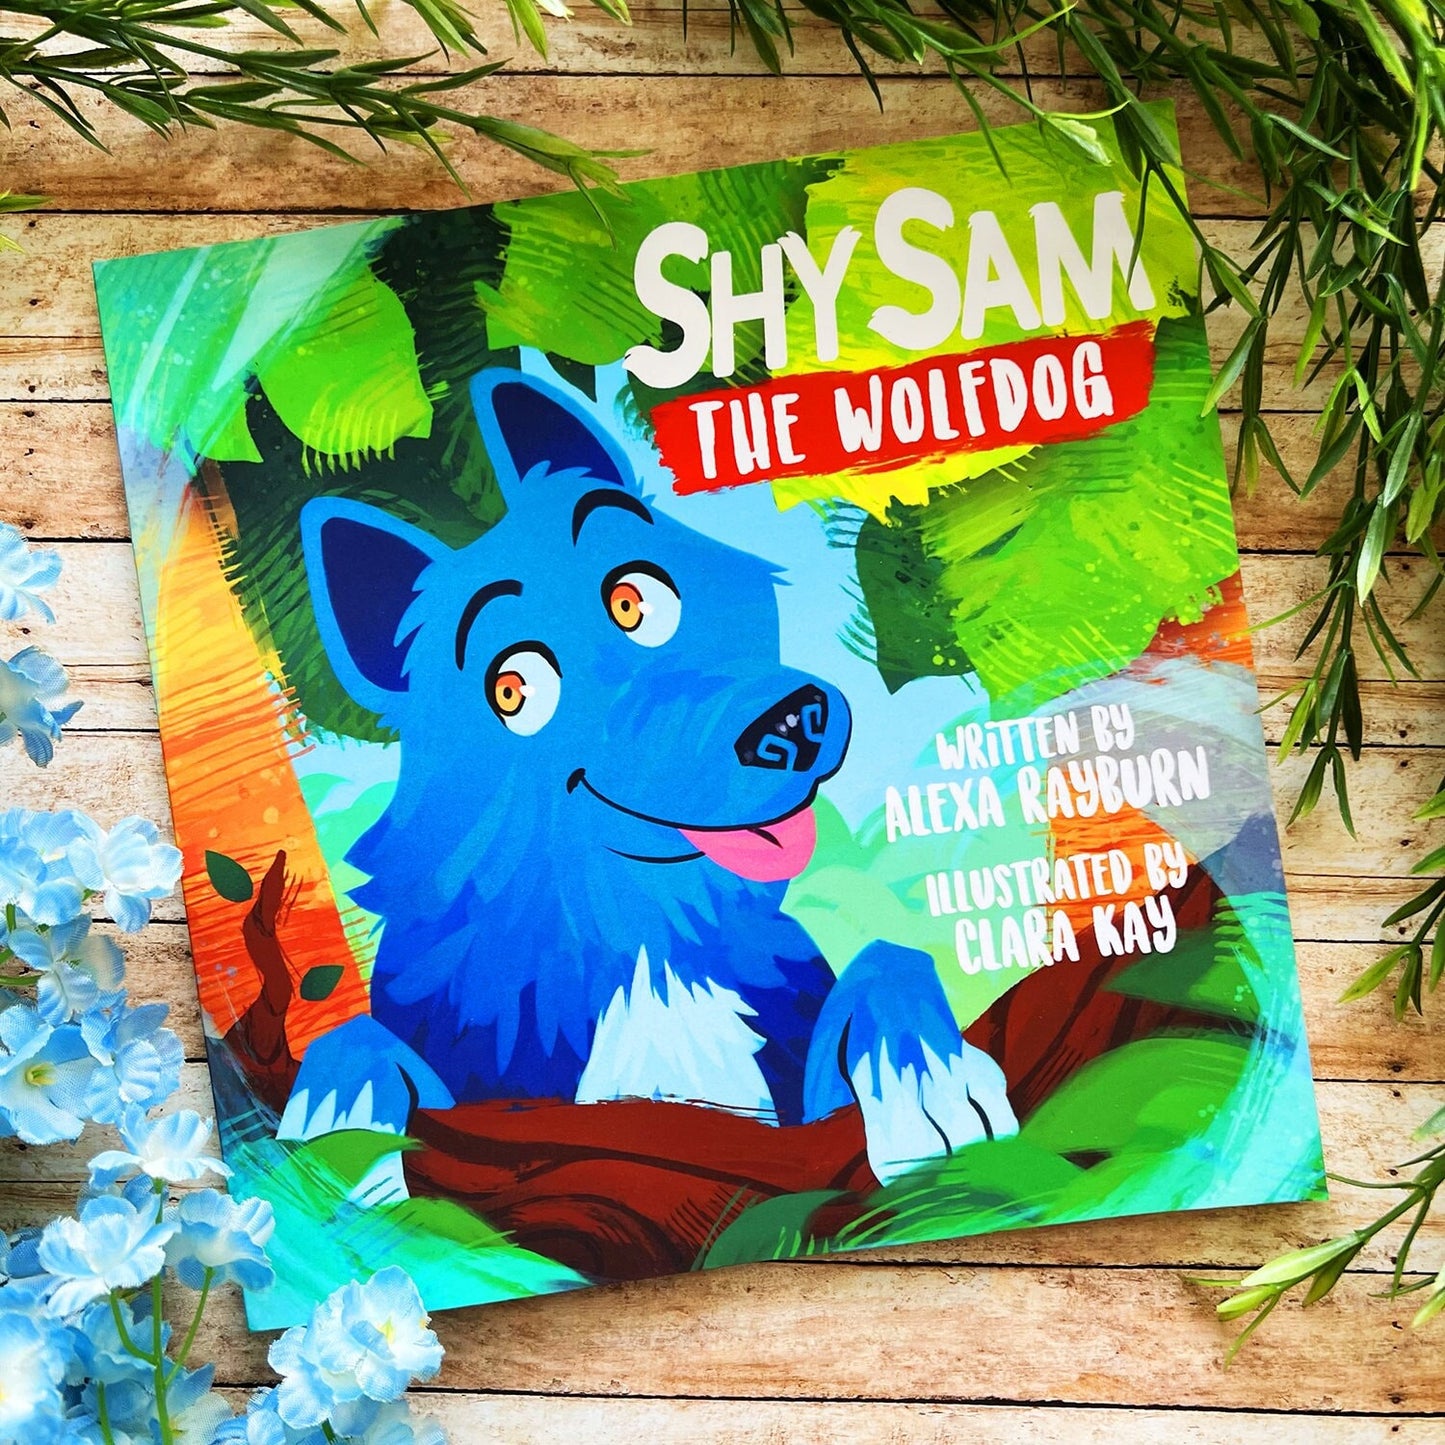 PET PICTURE BOOK: Shy Sam the Wolfdog